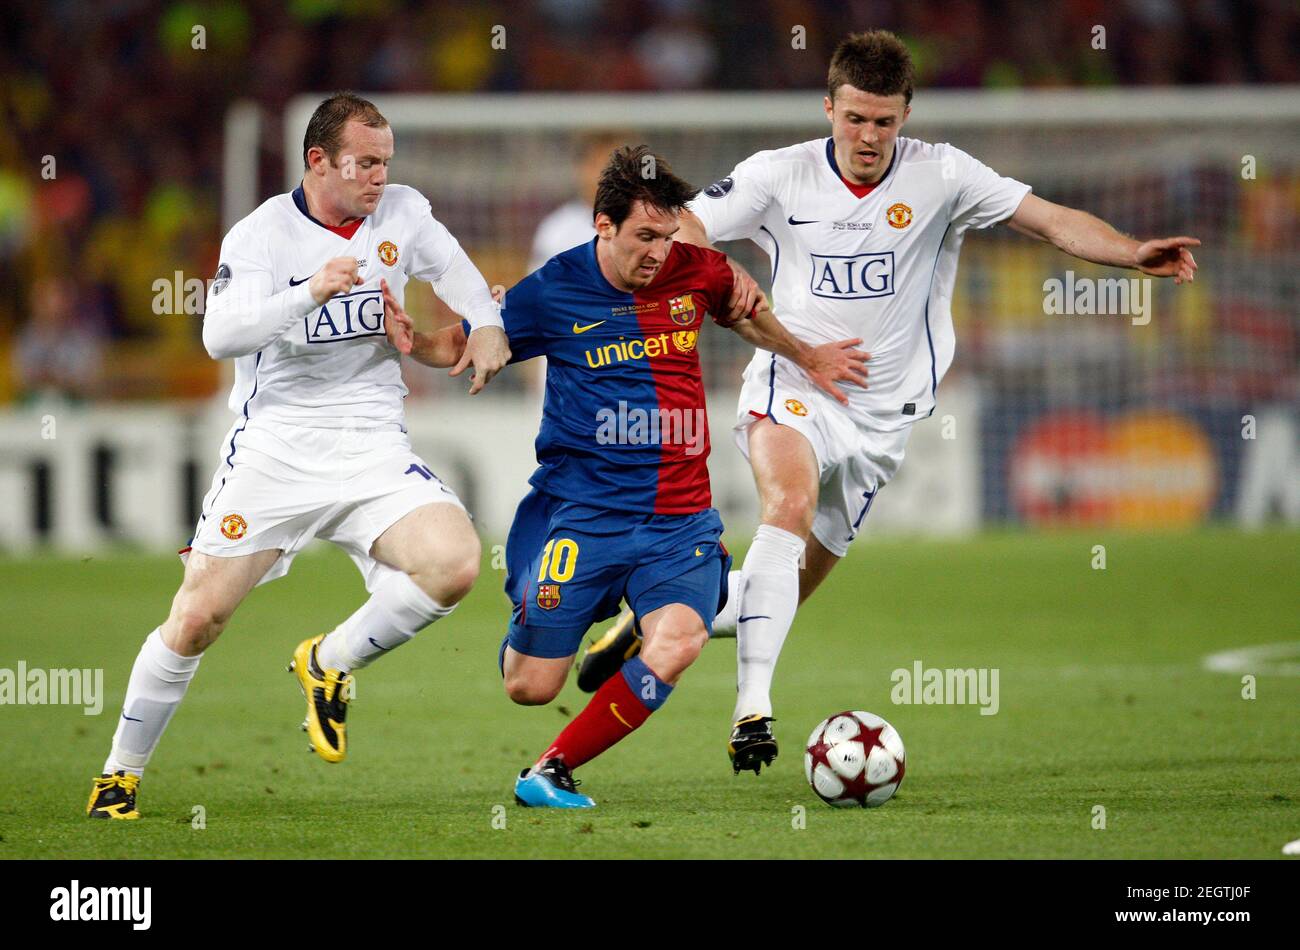 Football - Manchester United v FC Barcelona 2009 Champions League Final -  Olympic Stadium, Rome, Italy - 27/5/09 Manchester United's Wayne Rooney (L)  and Michael Carrick in action with Barcelona's Lionel Messi